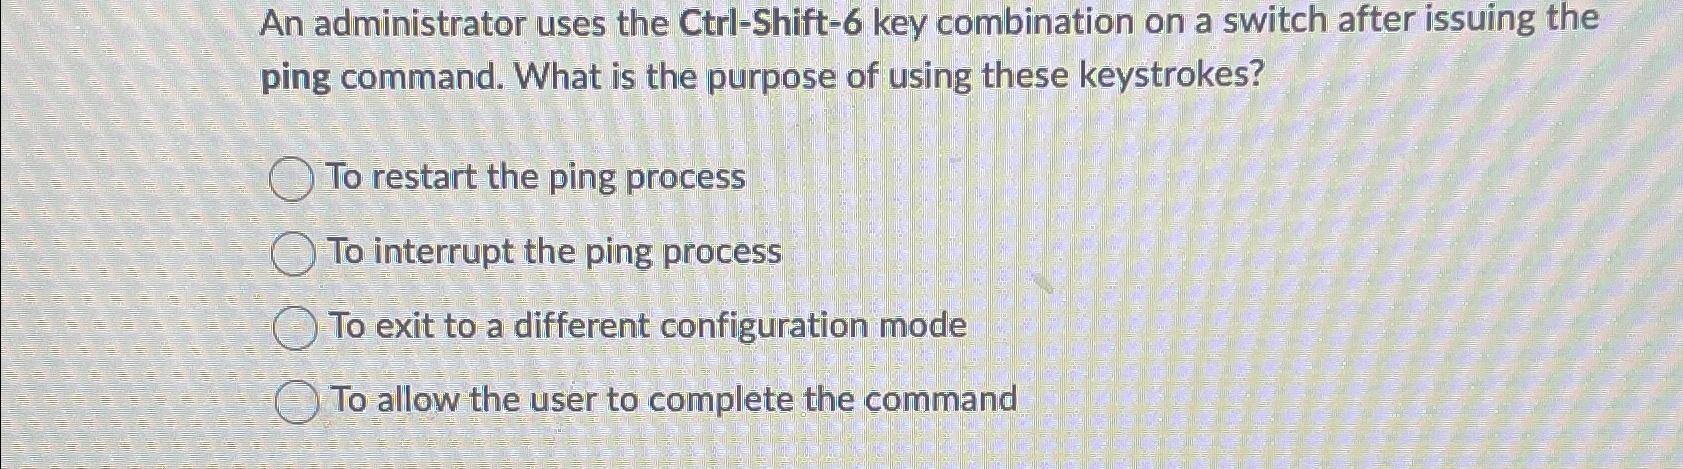 An administrator uses the Ctrl-Shift-6 key combination on a switch after issuing the ping command. What is